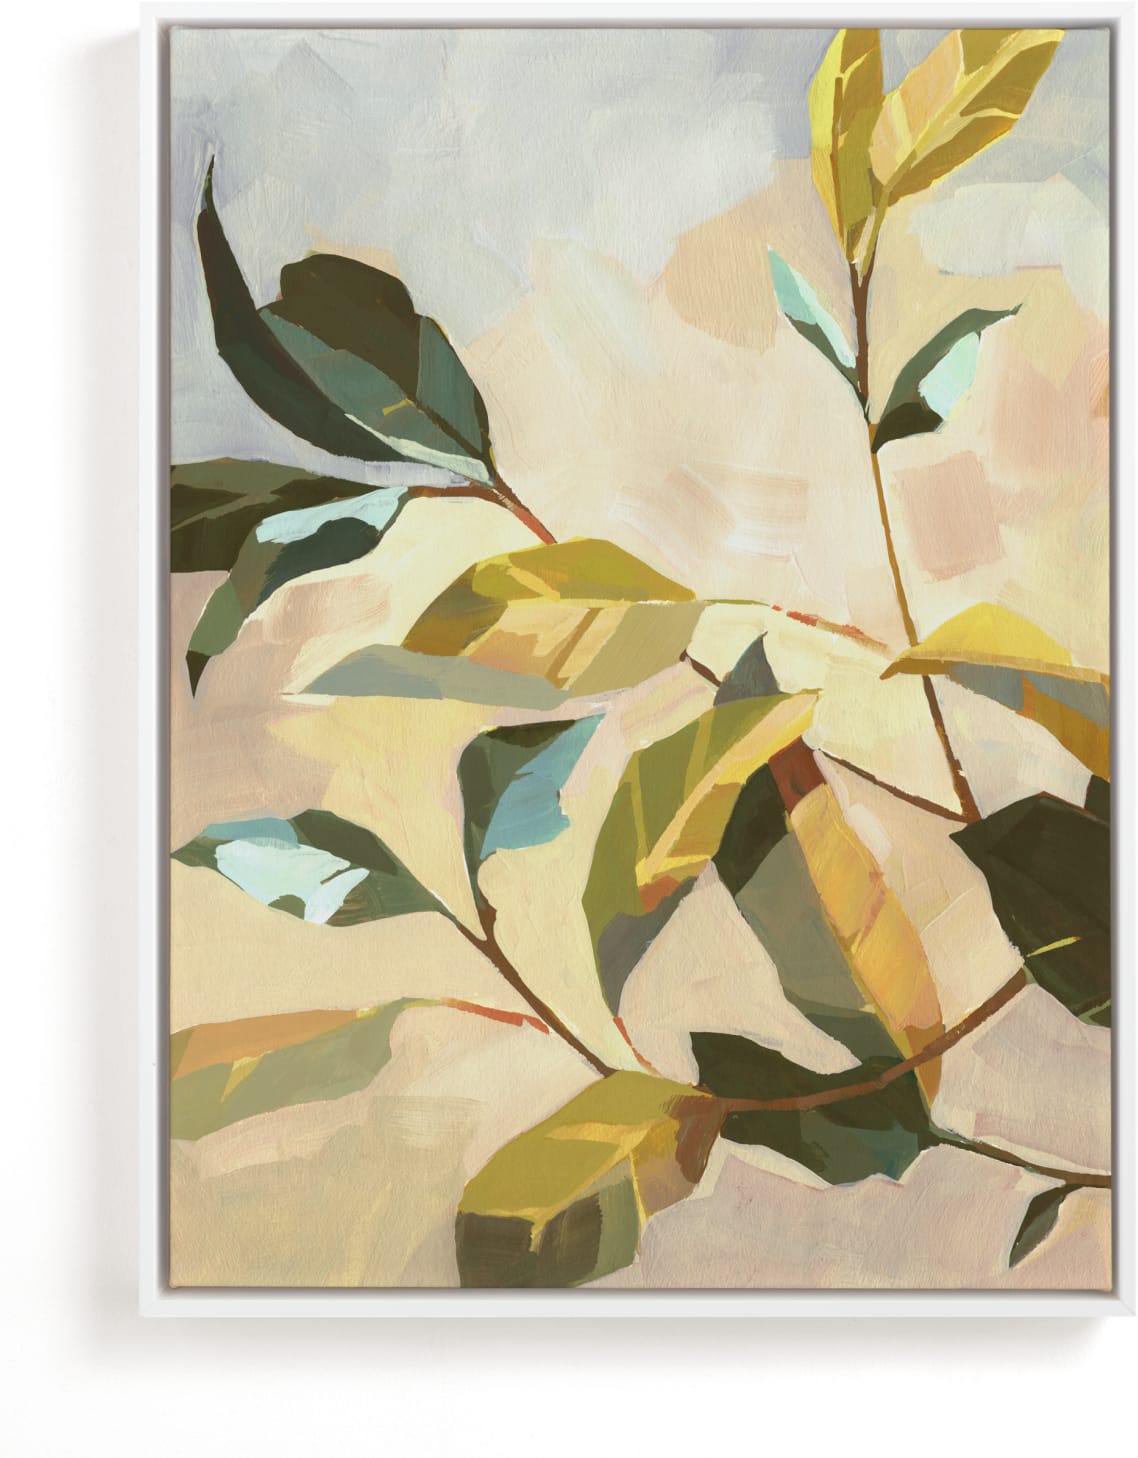 This is a yellow, green art by Khara Ledonne called Bay Laurel II.